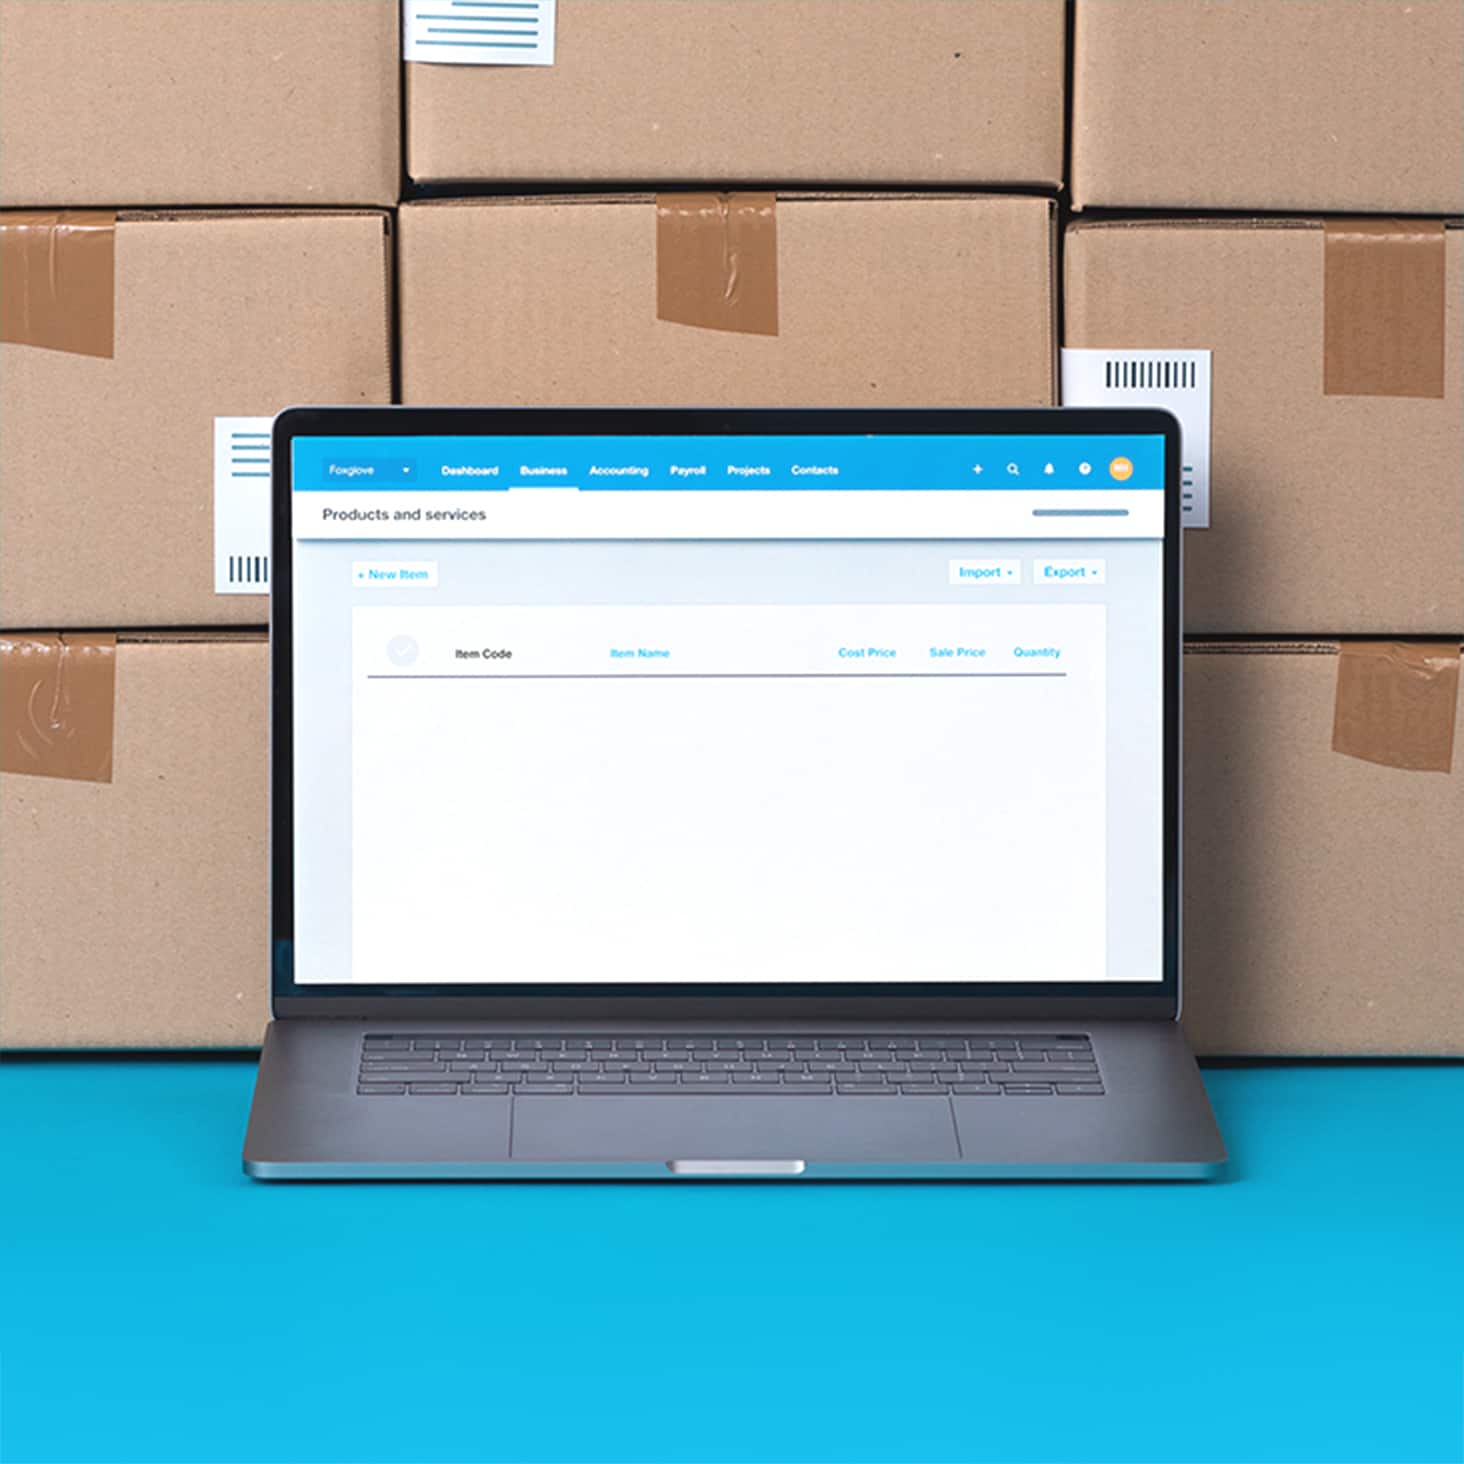 Unopened boxes are stacked near a laptop that displays items in Xero’s stock management software.